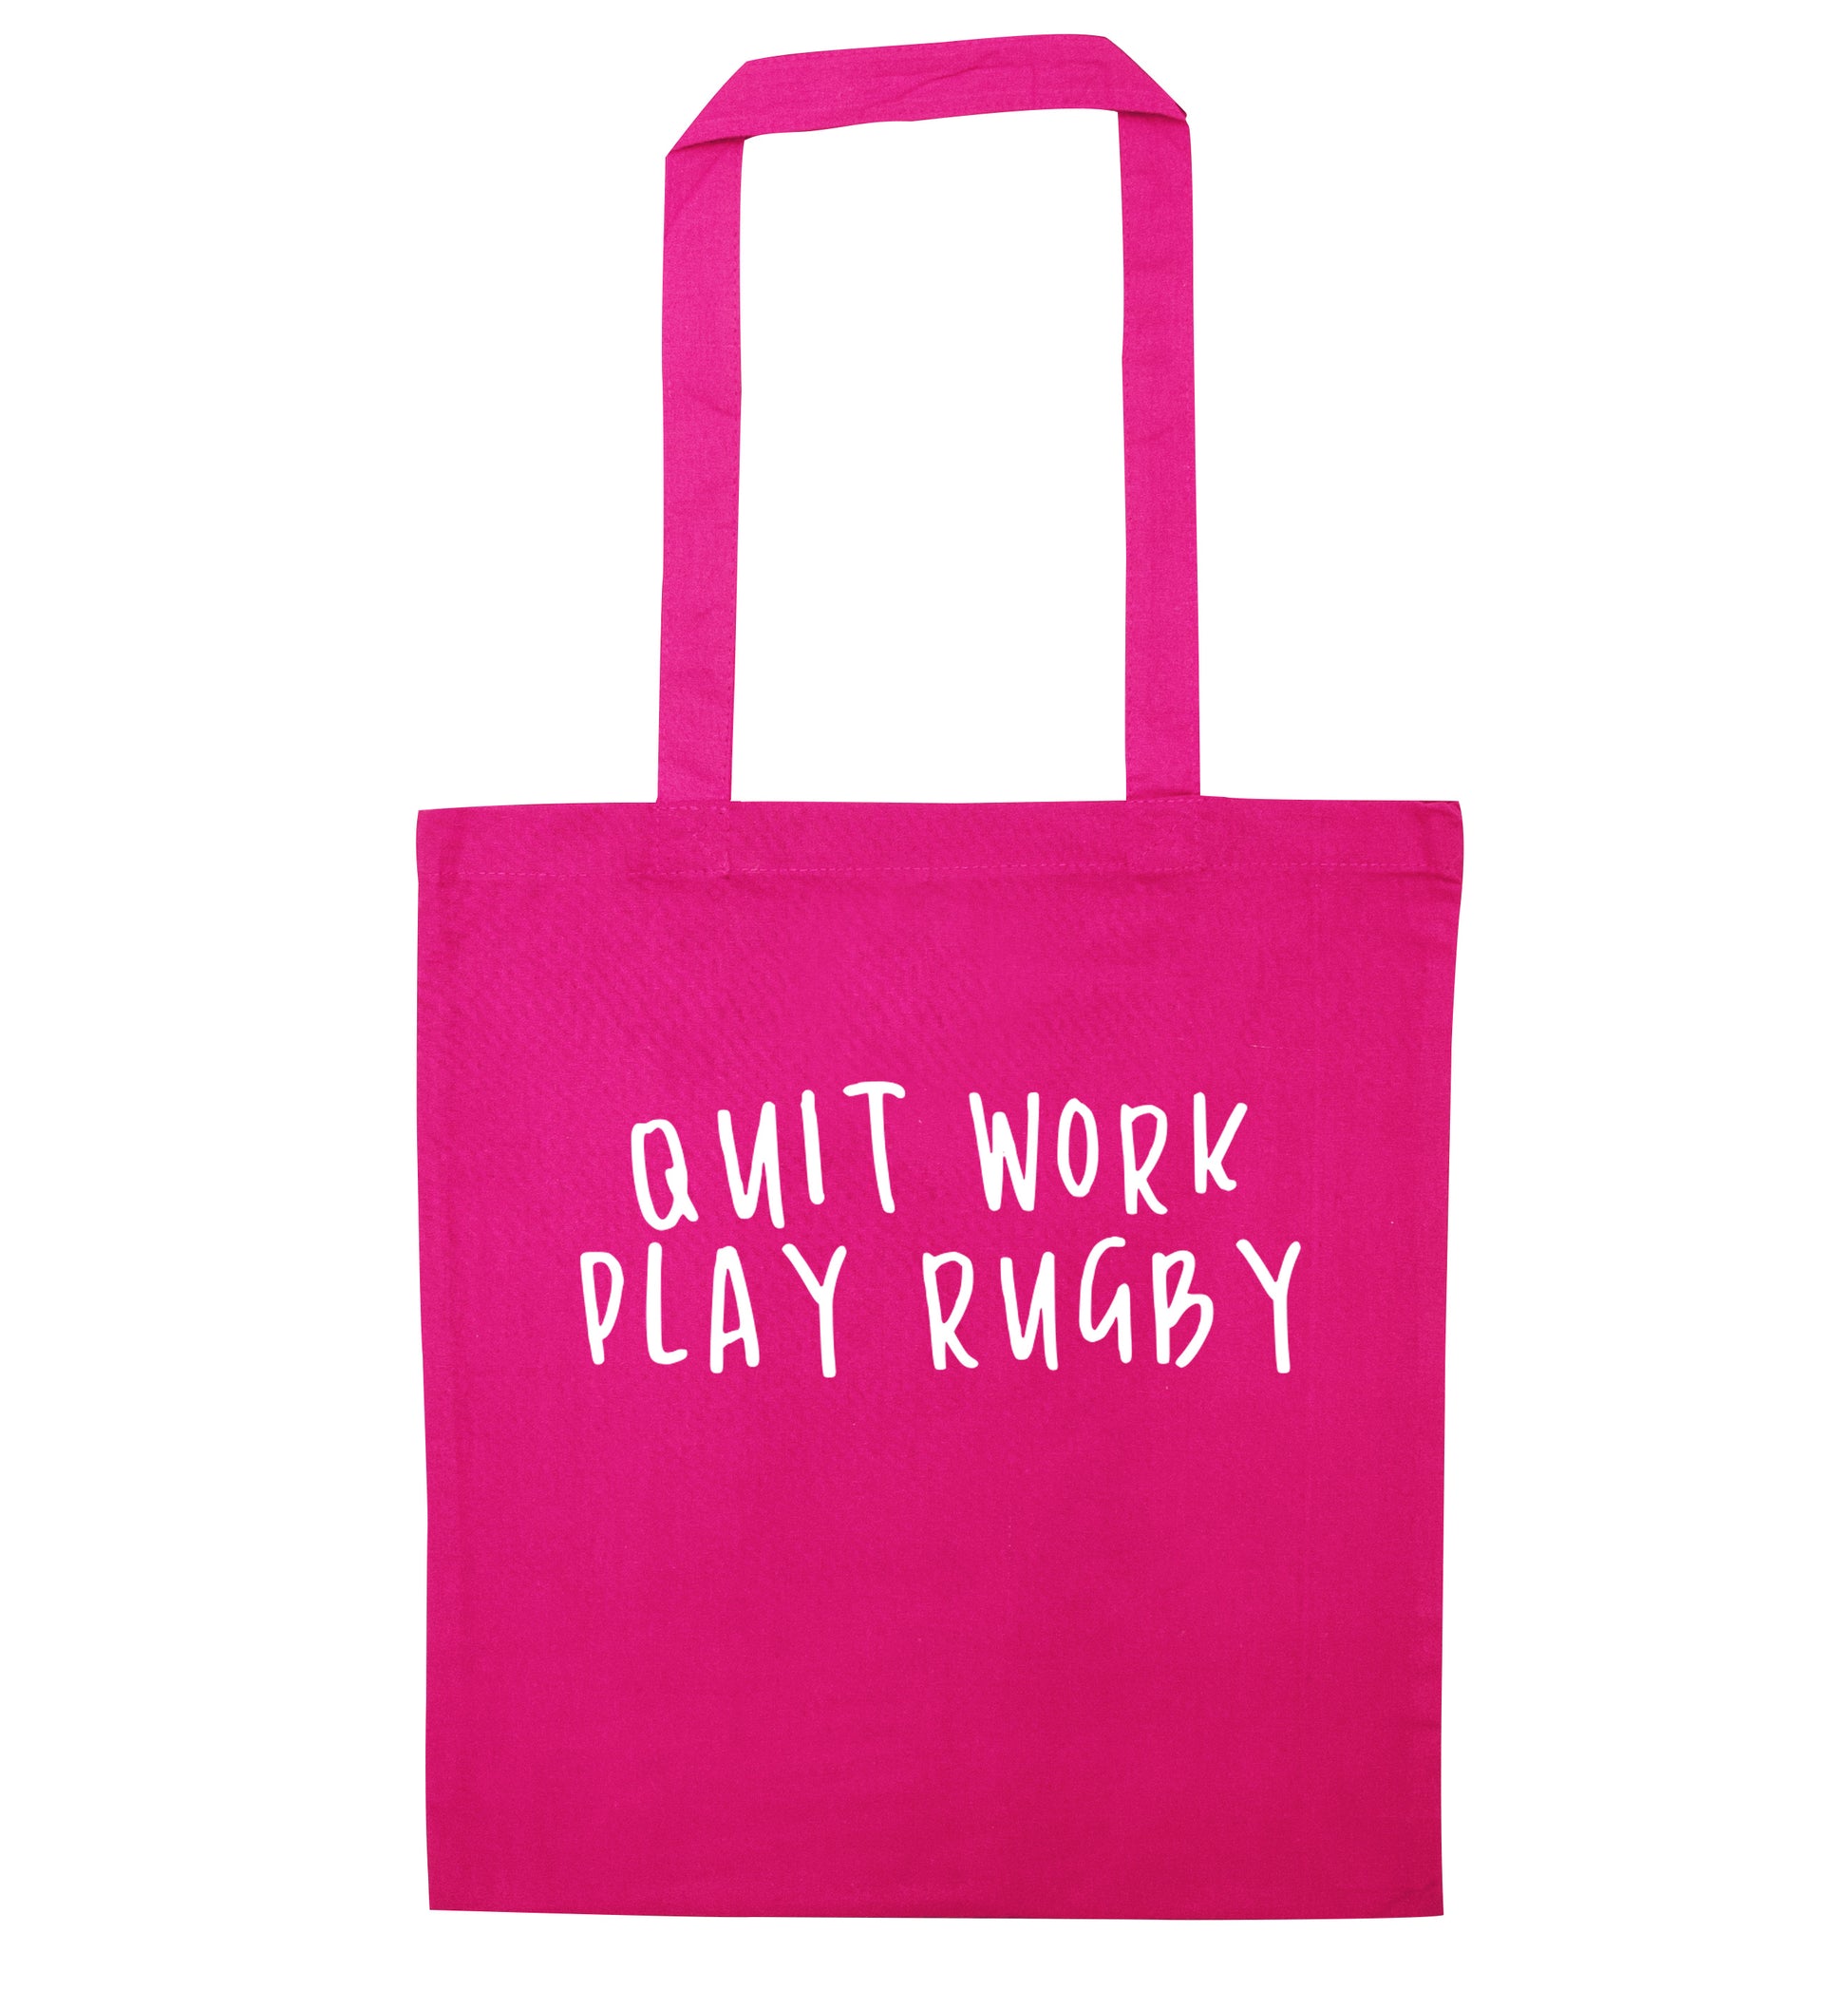 Quit work play rugby pink tote bag